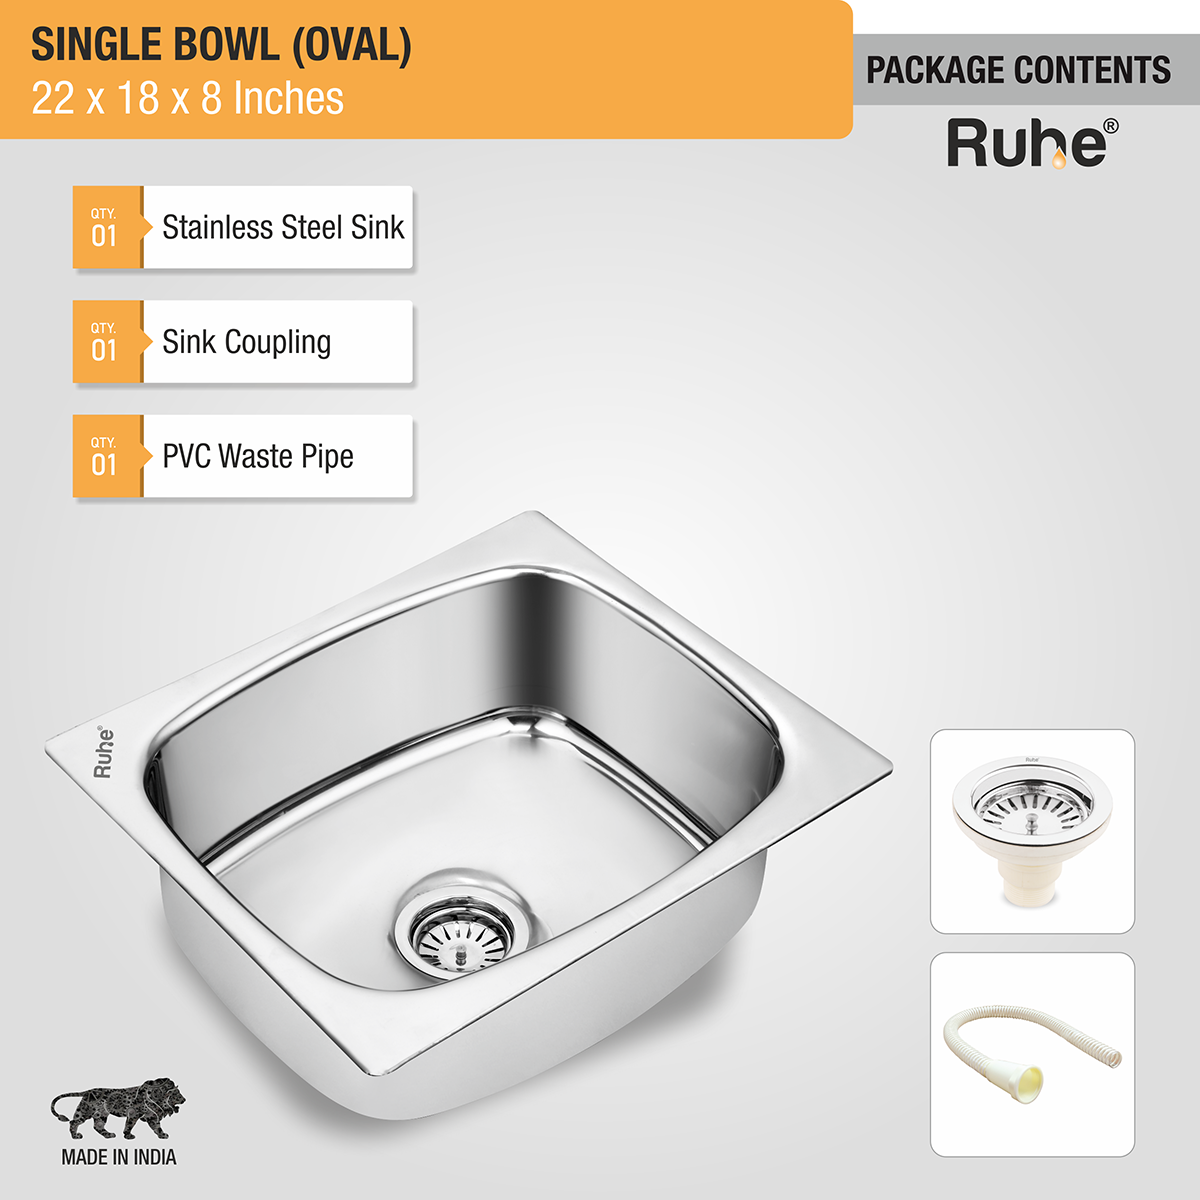 Oval Single Bowl (22 x 18 x 8 inches) Kitchen Sink package